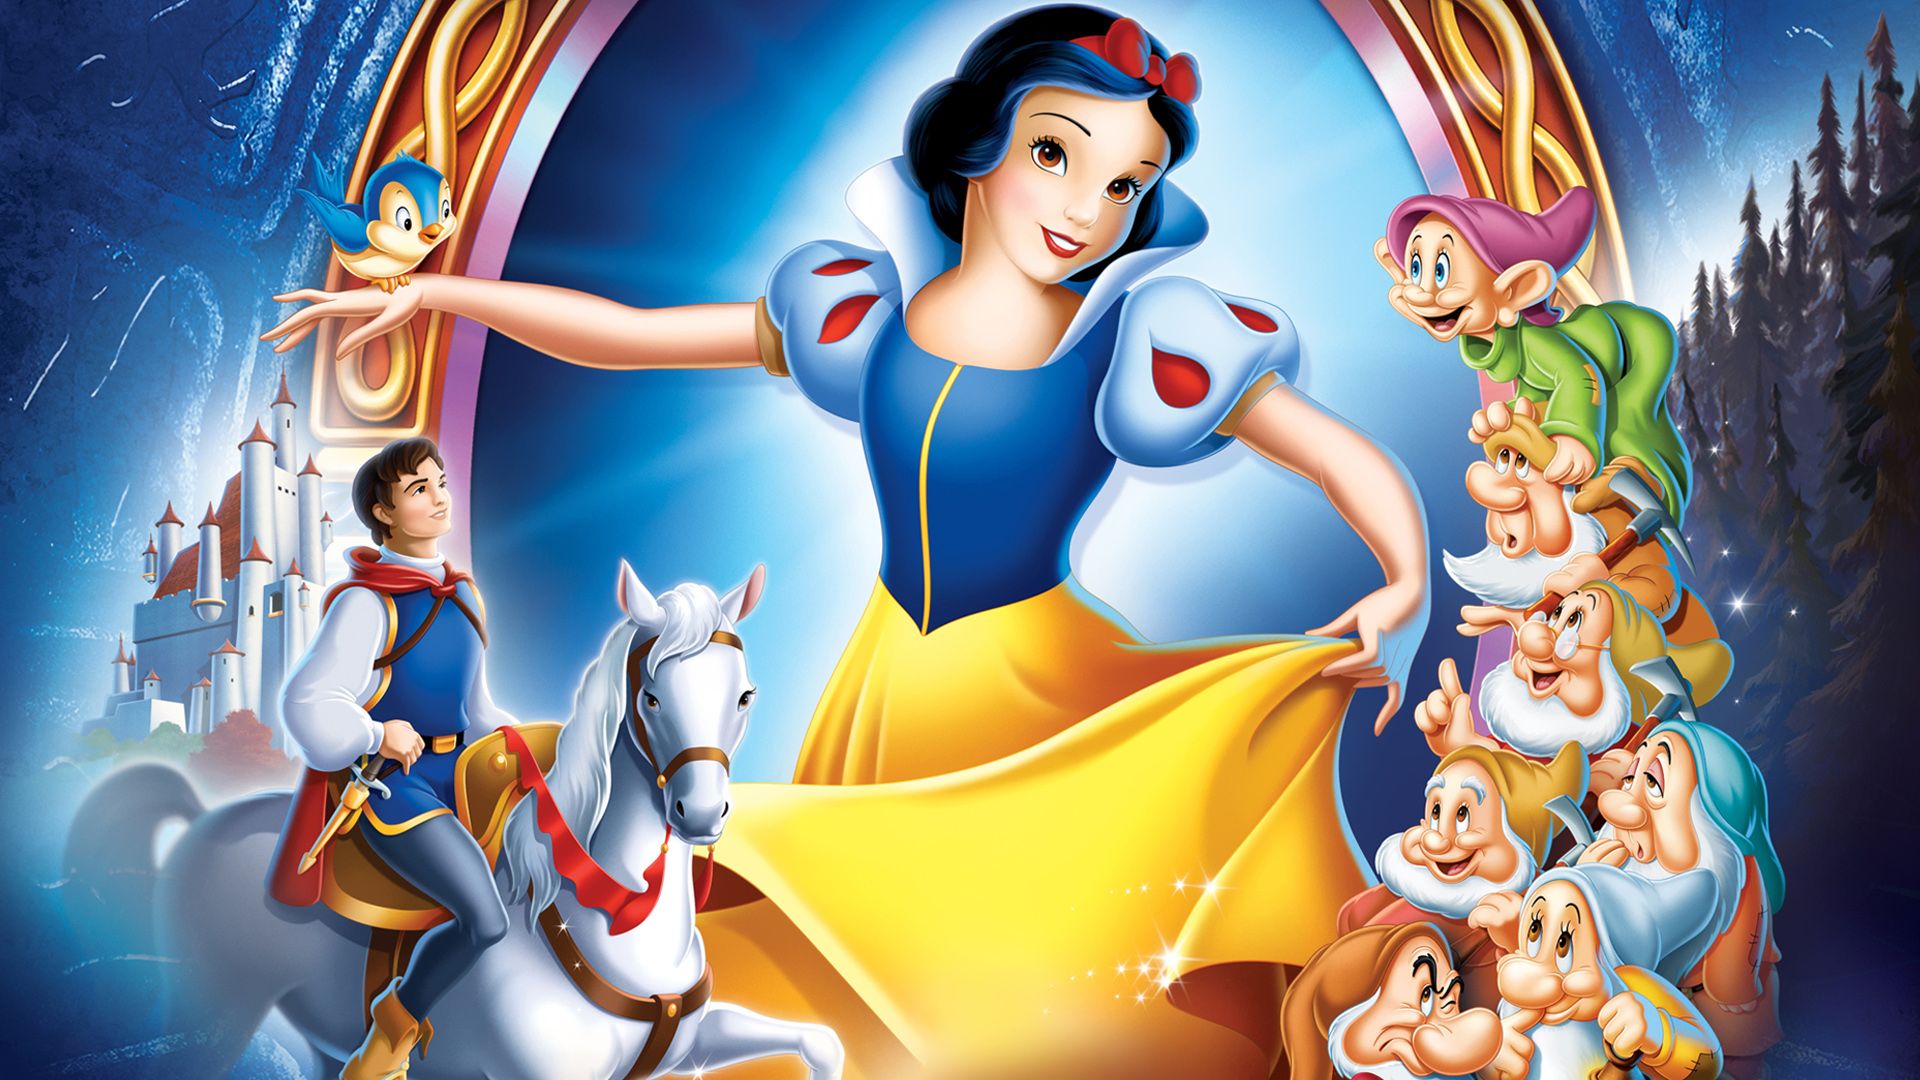 Snow White and the Seven Dwarfs background